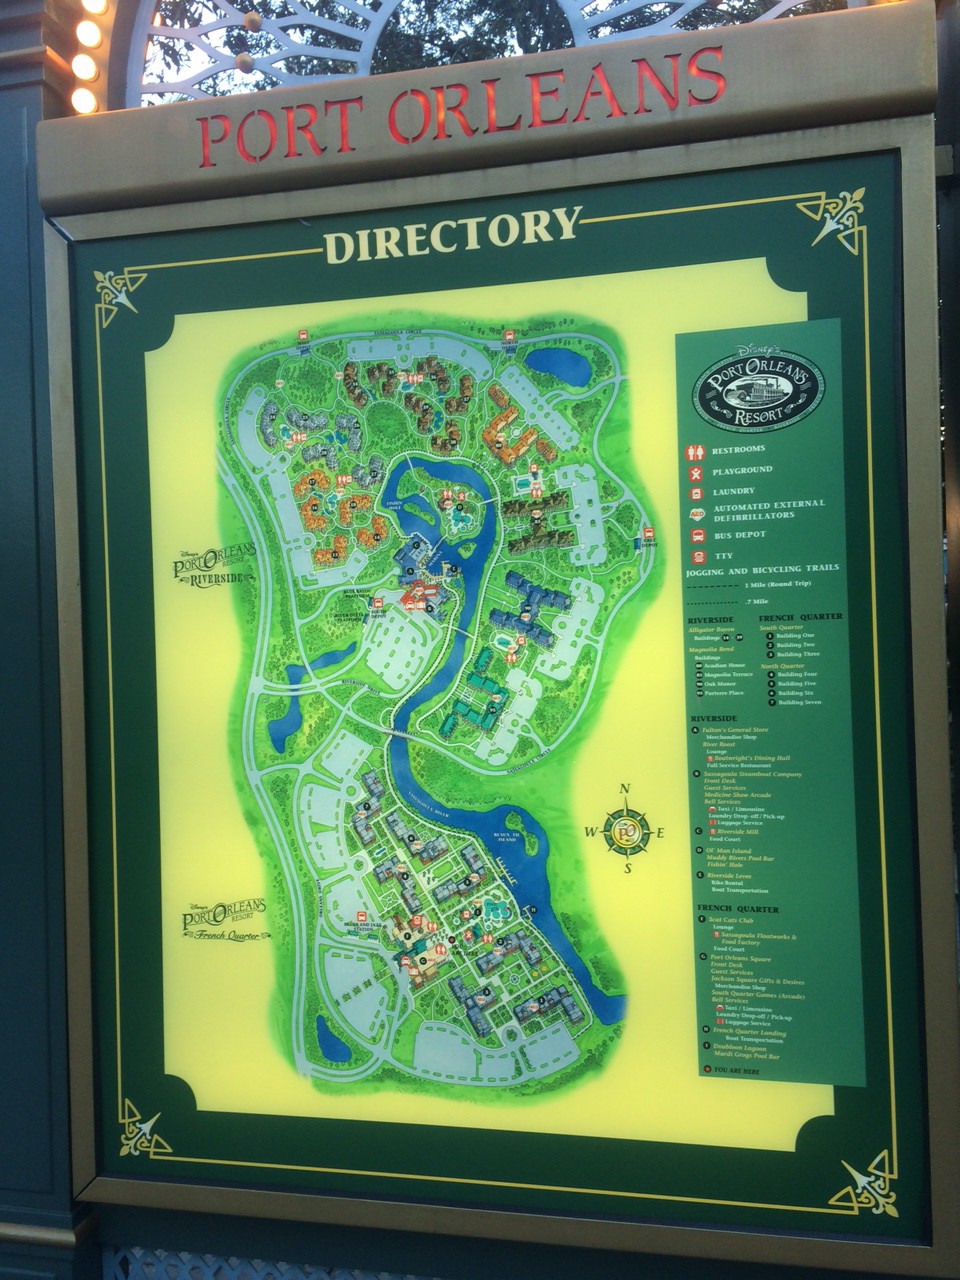 Layout of the resort and river running through.